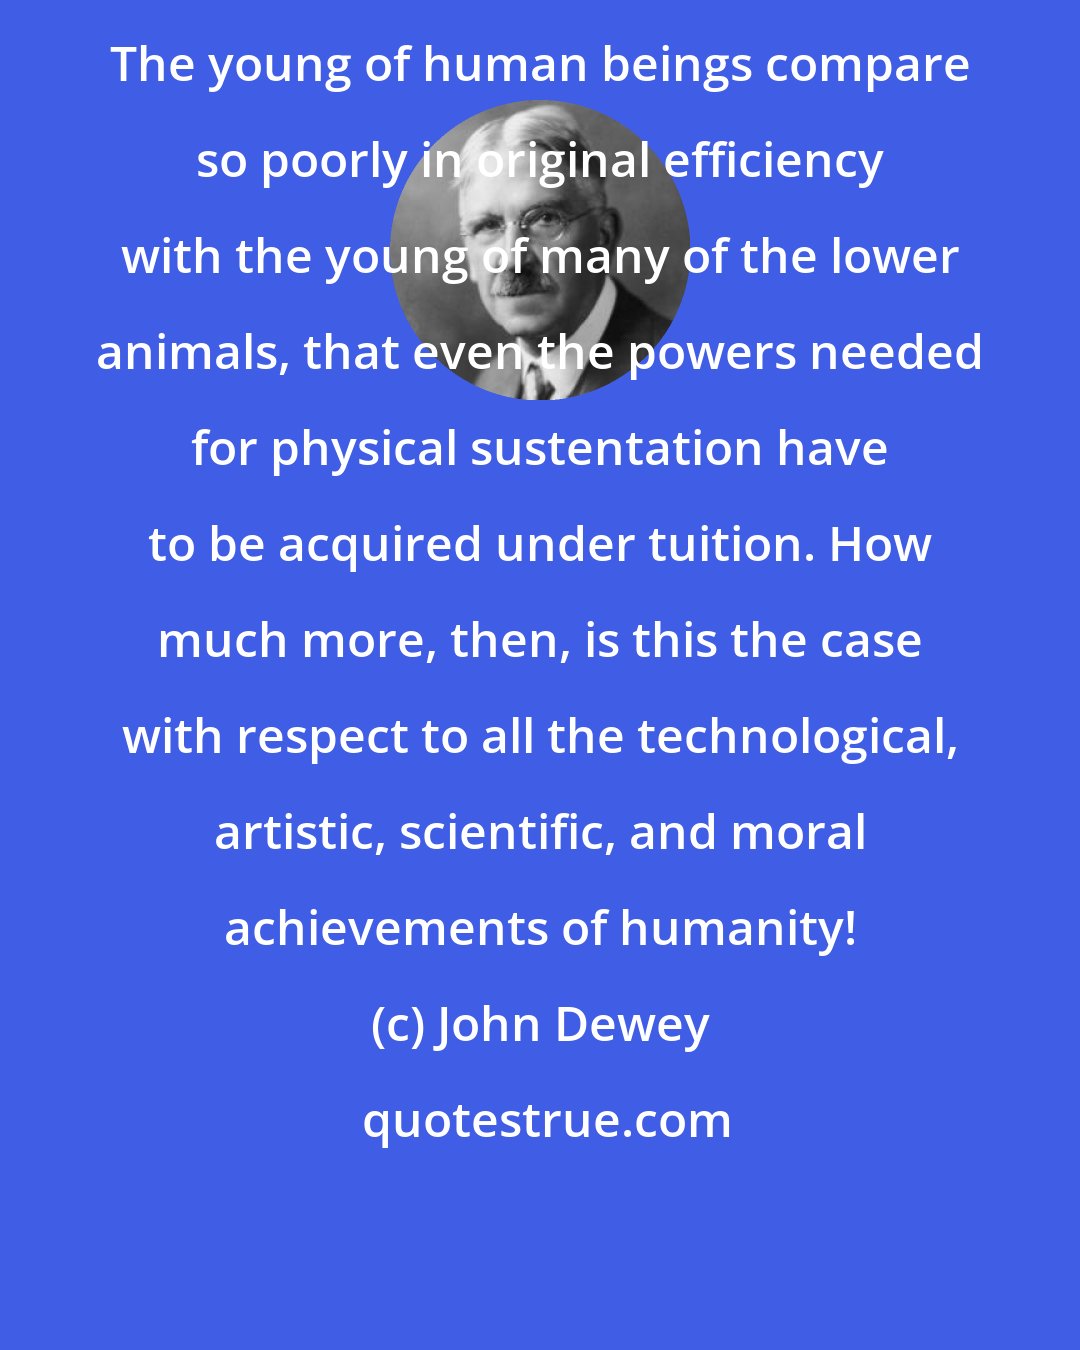 John Dewey: The young of human beings compare so poorly in original efficiency with the young of many of the lower animals, that even the powers needed for physical sustentation have to be acquired under tuition. How much more, then, is this the case with respect to all the technological, artistic, scientific, and moral achievements of humanity!